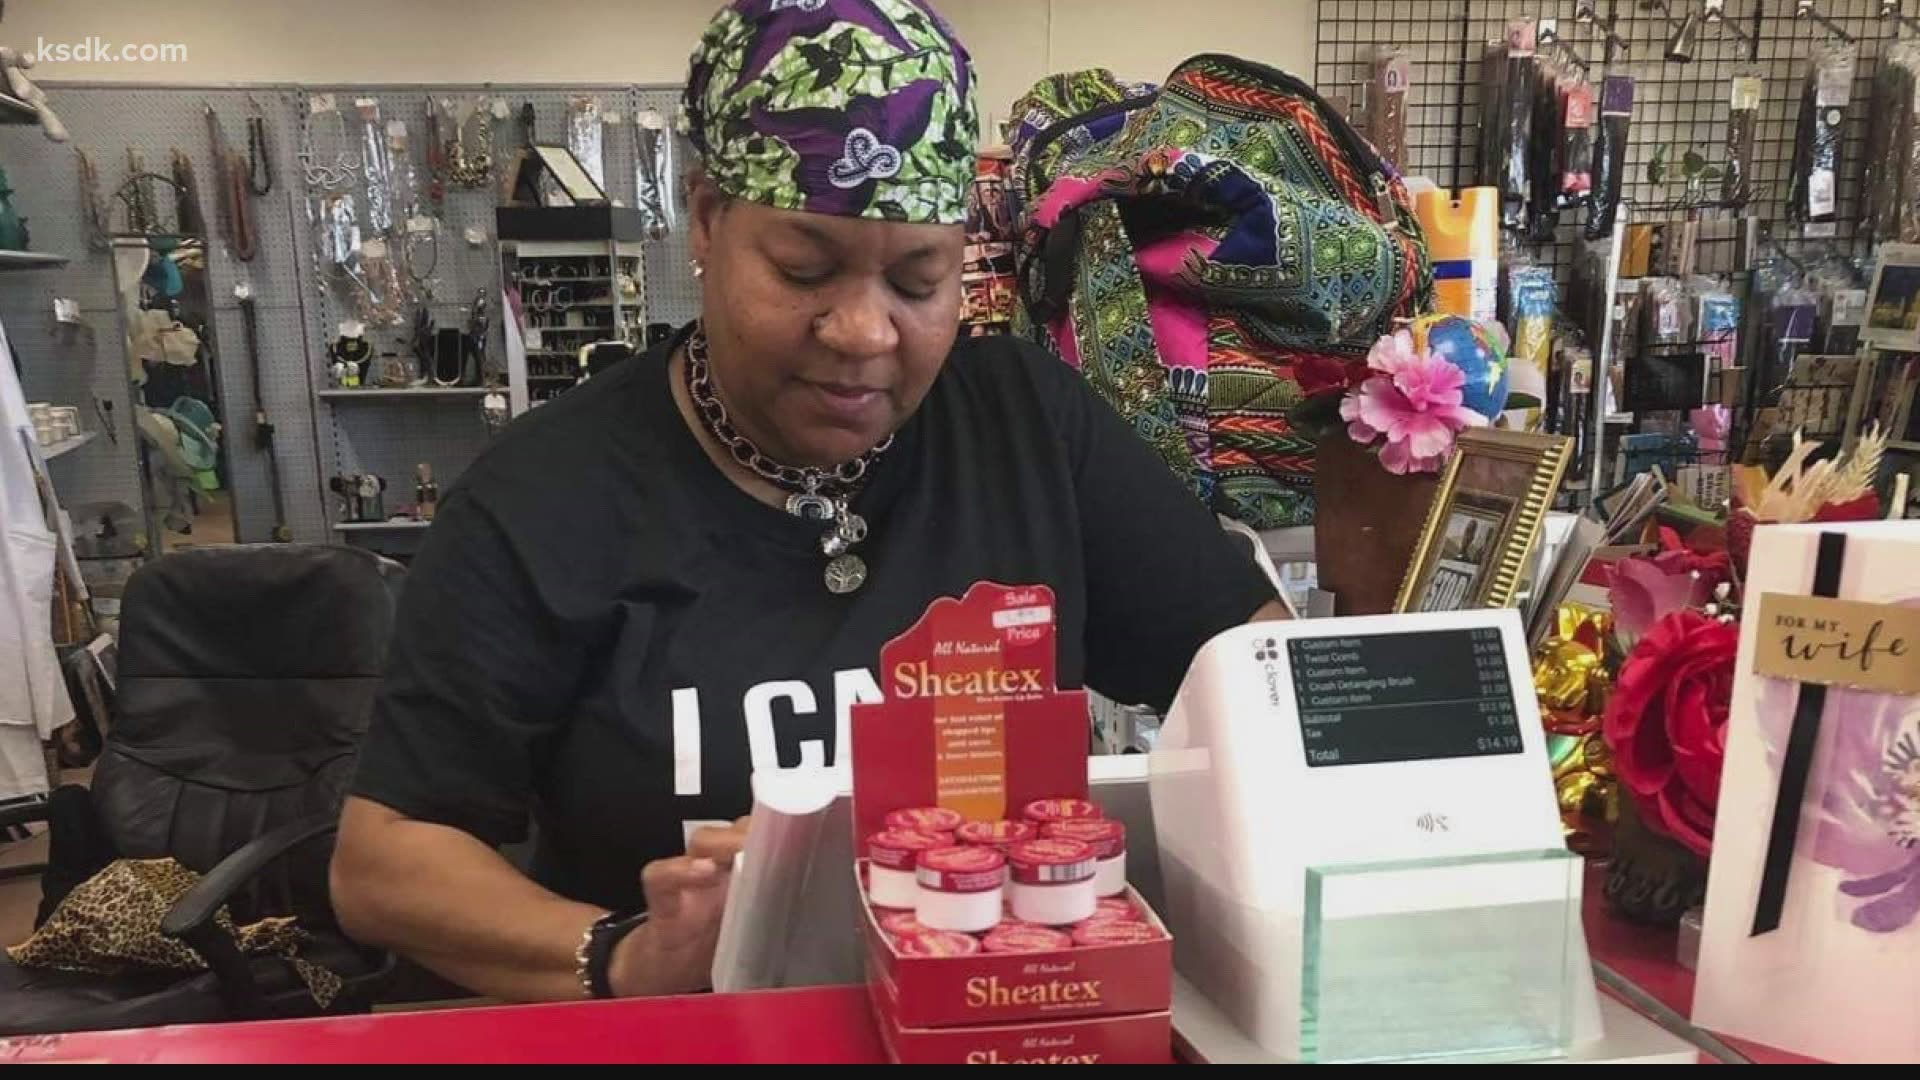 St. louis black owned business struggling during pandemic ...